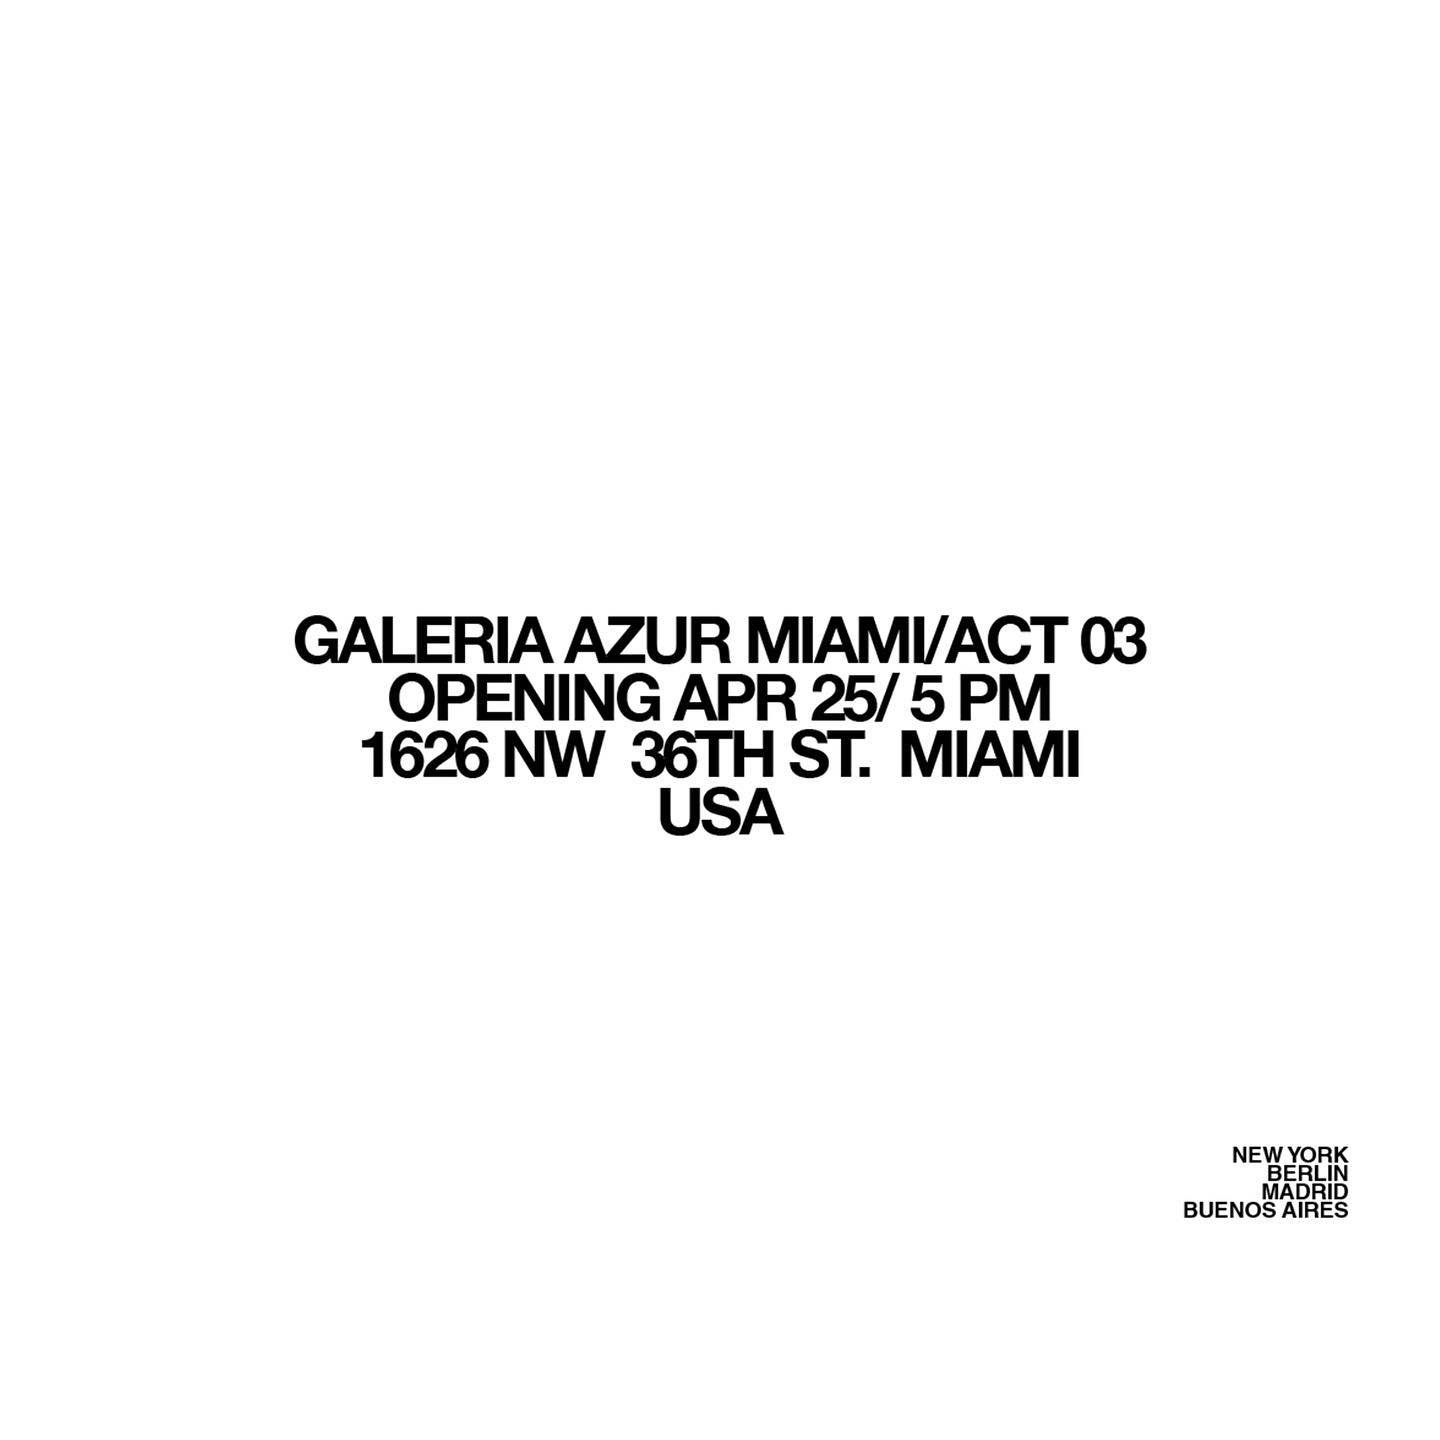 TODAY IS THE DAY!

ACT III' of @galeriaazur.miami / @galeriaazur in Miami, Florida is opening TODAY! The vernissage starts at 5pm, and the exhibition will be open until the 24th of May. If you are in Miami, go check it out to see some of my works amo